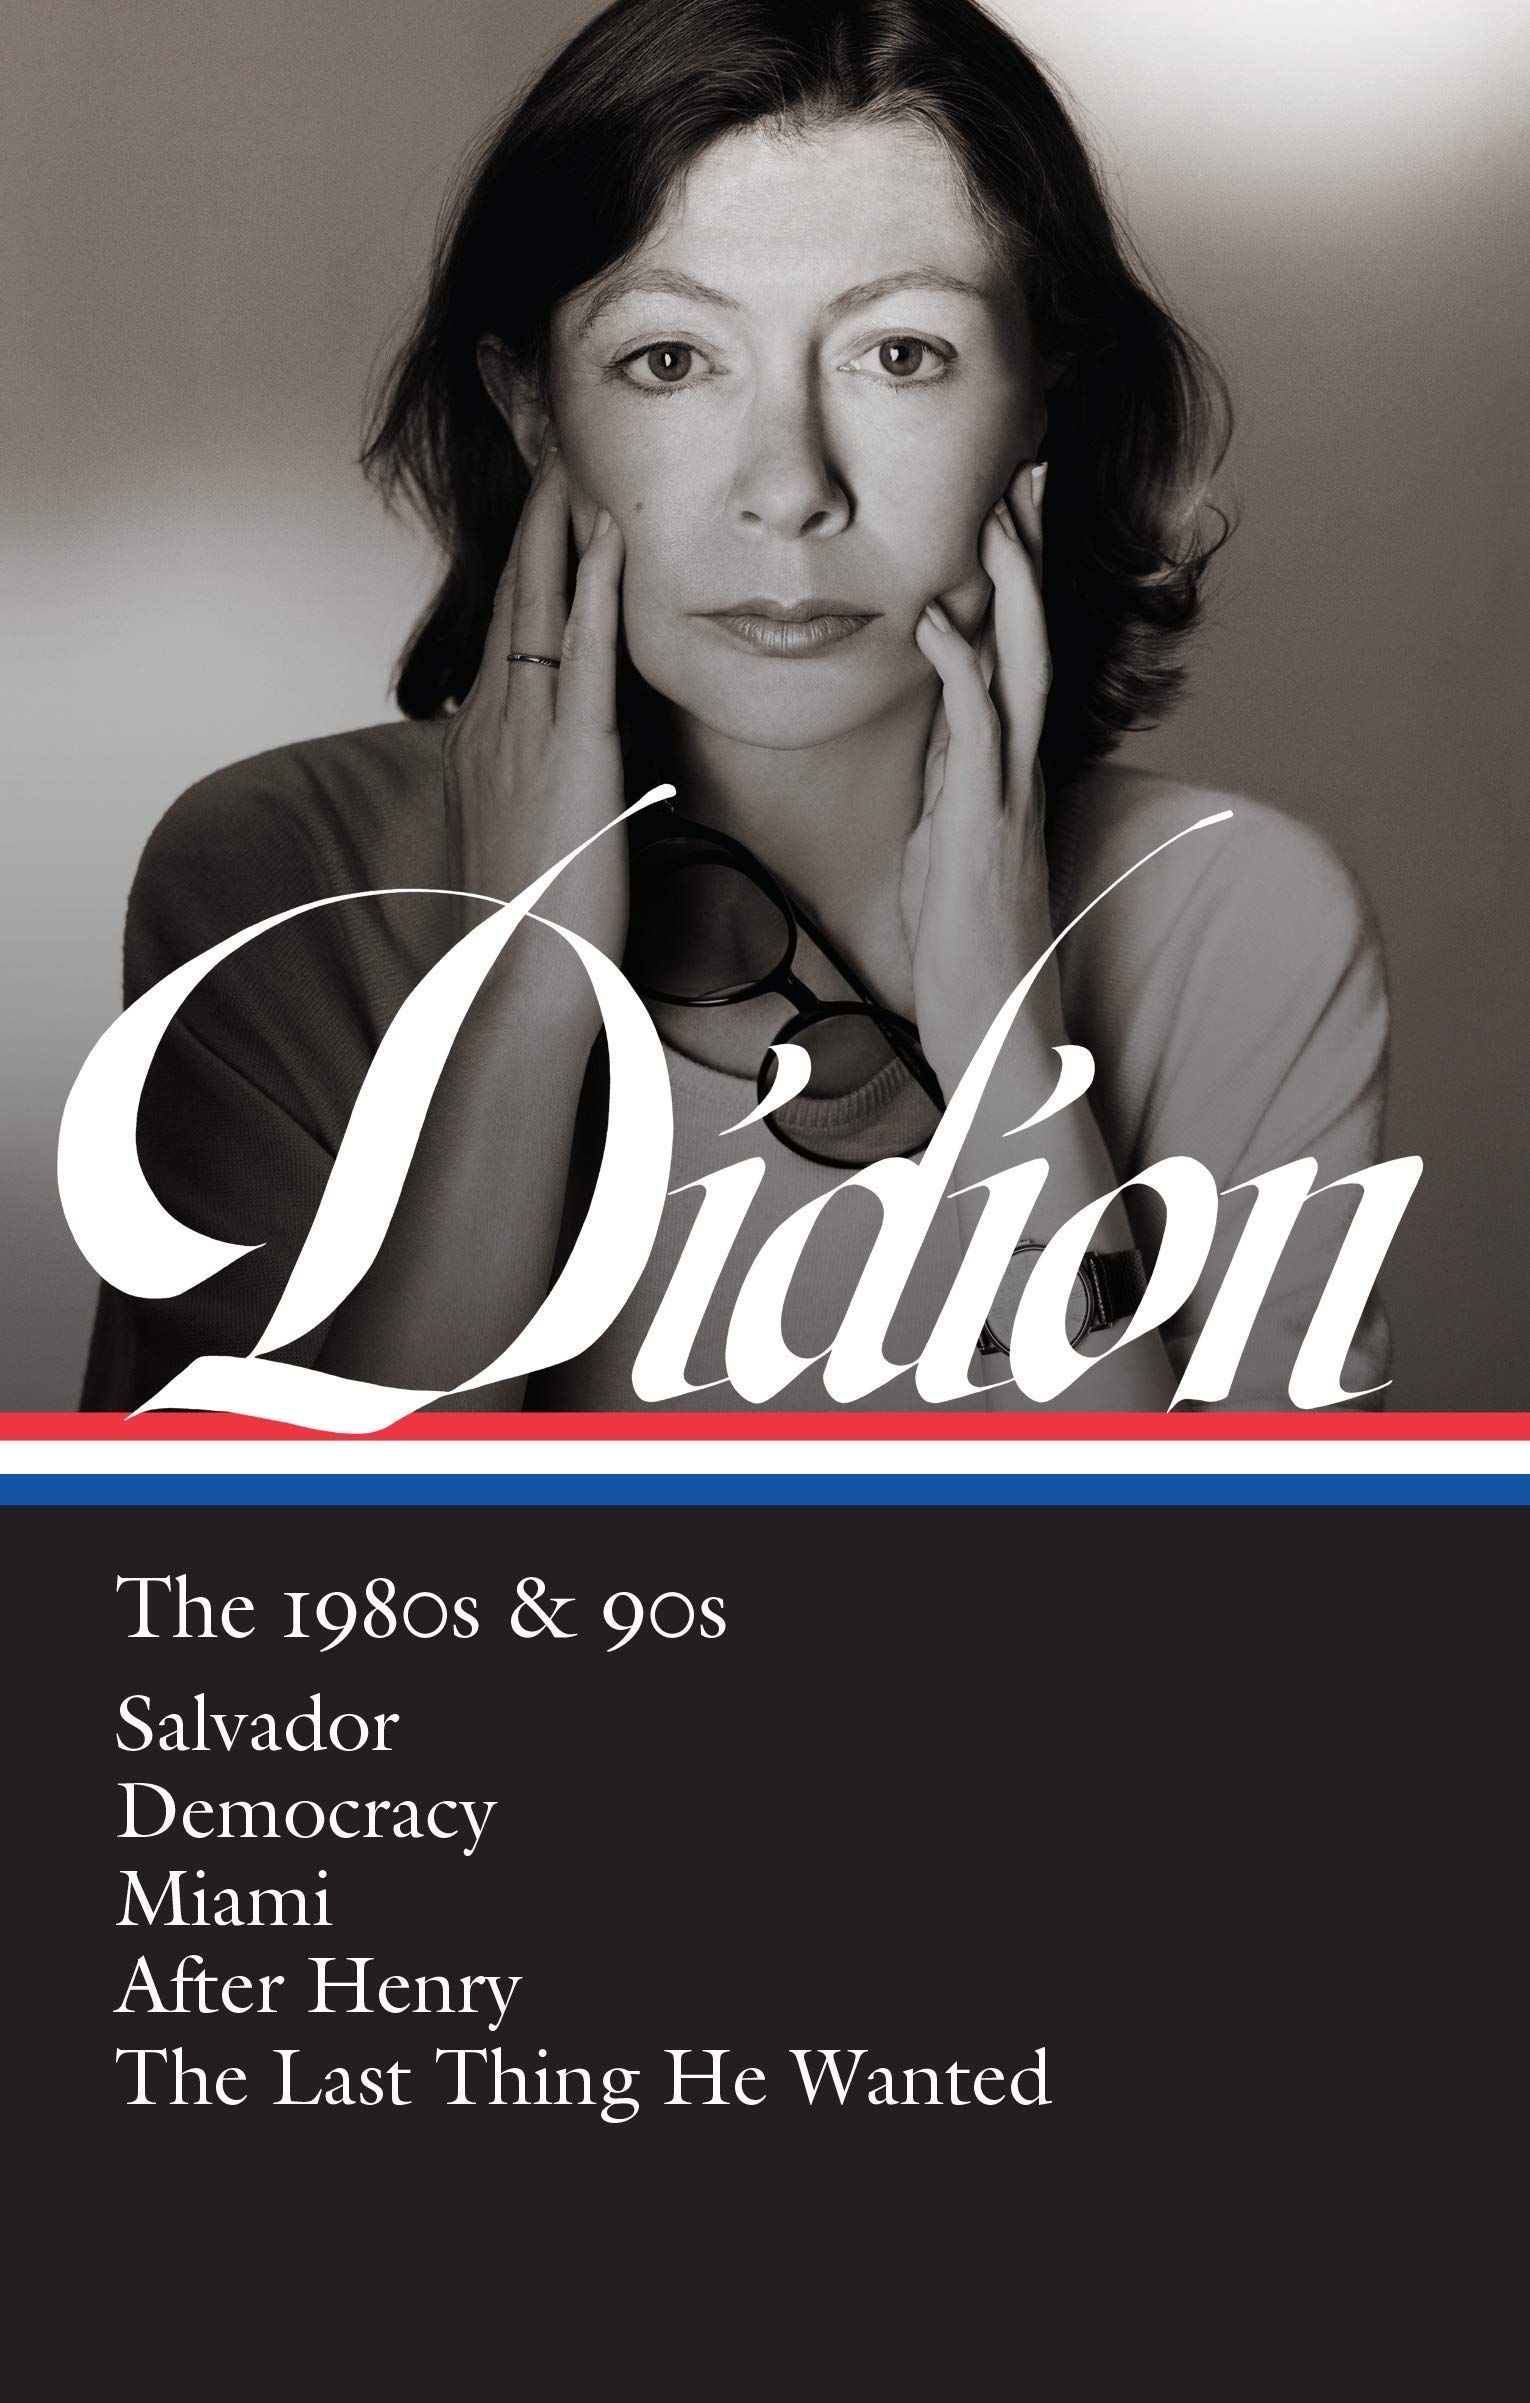 An Innocent Abroad: Joan Didion’s Midlife Crisis